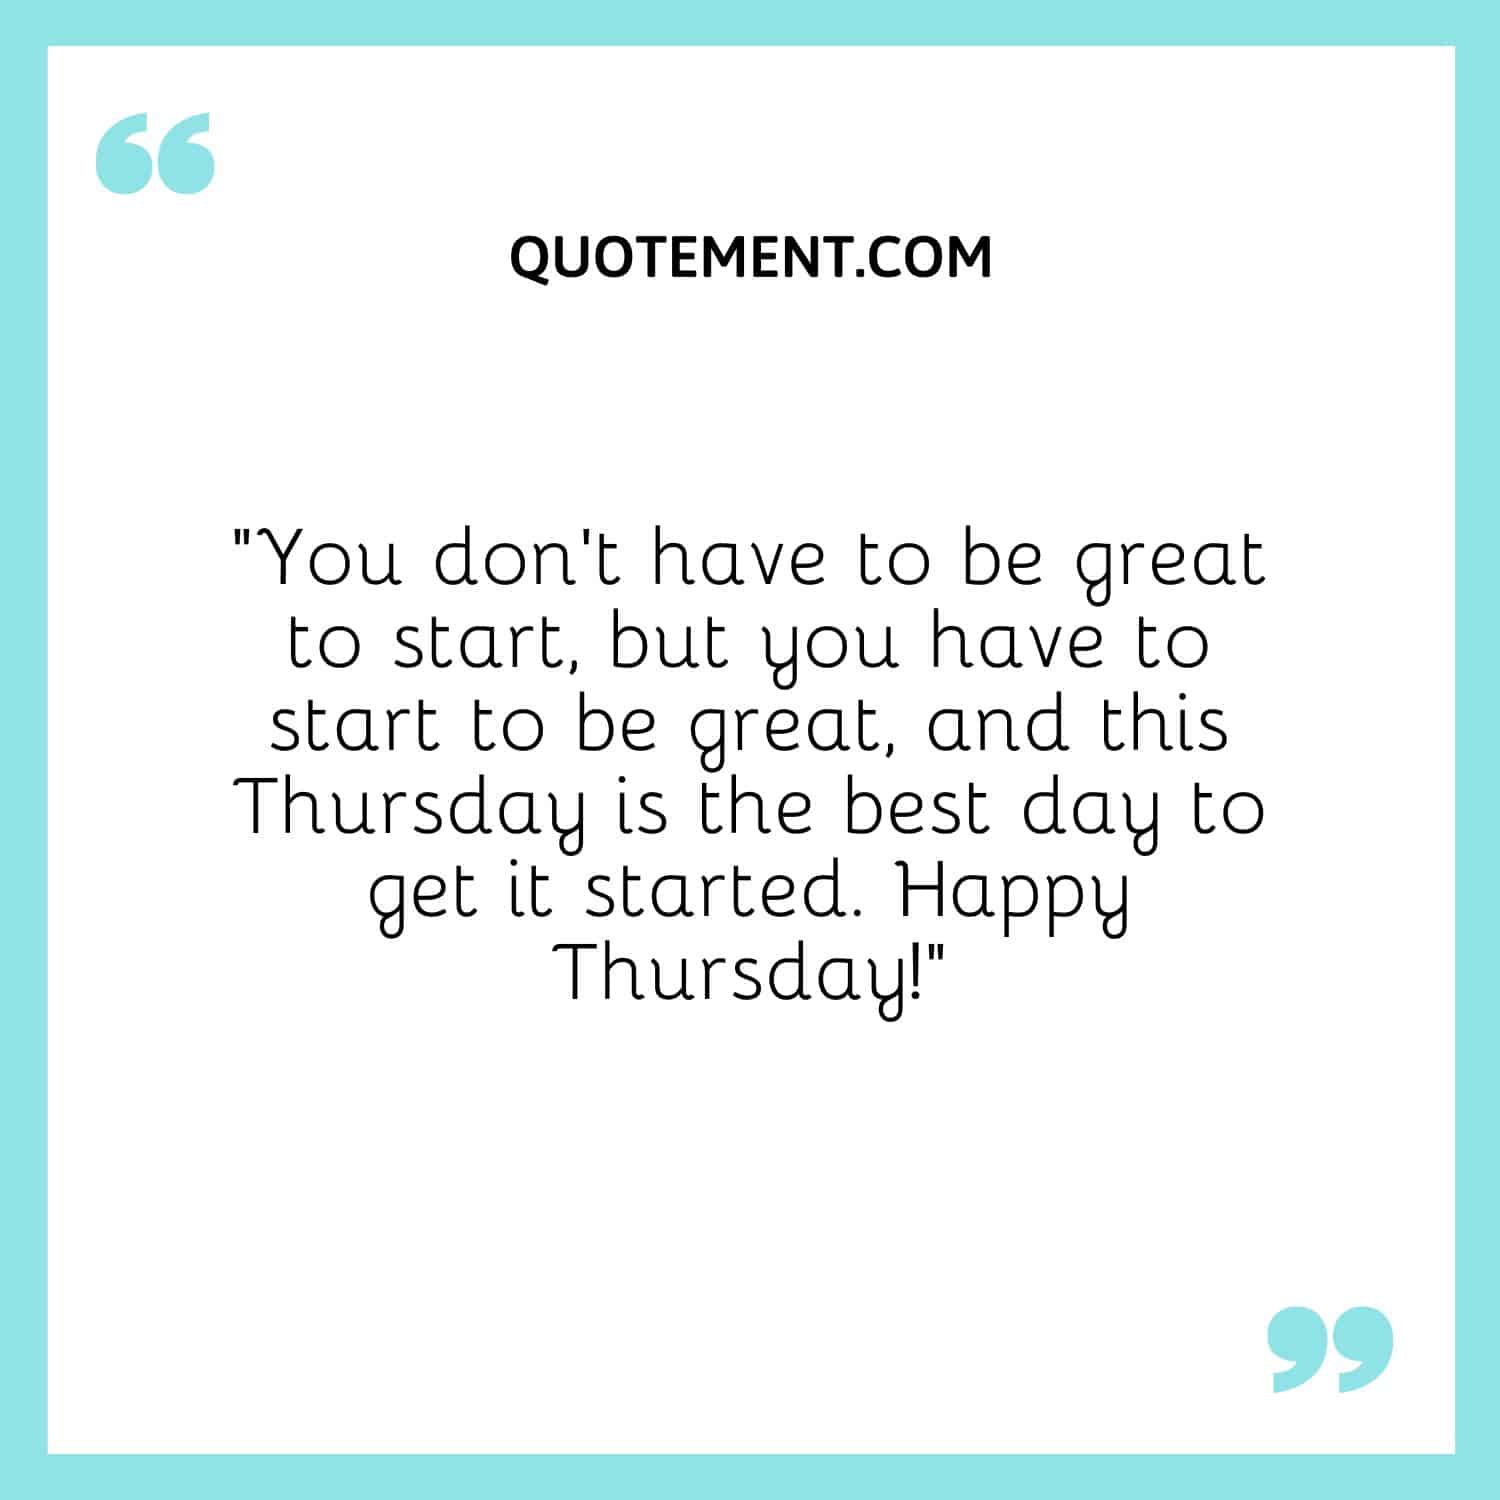 “You don’t have to be great to start, but you have to start to be great, and this Thursday is the best day to get it started. Happy Thursday!”